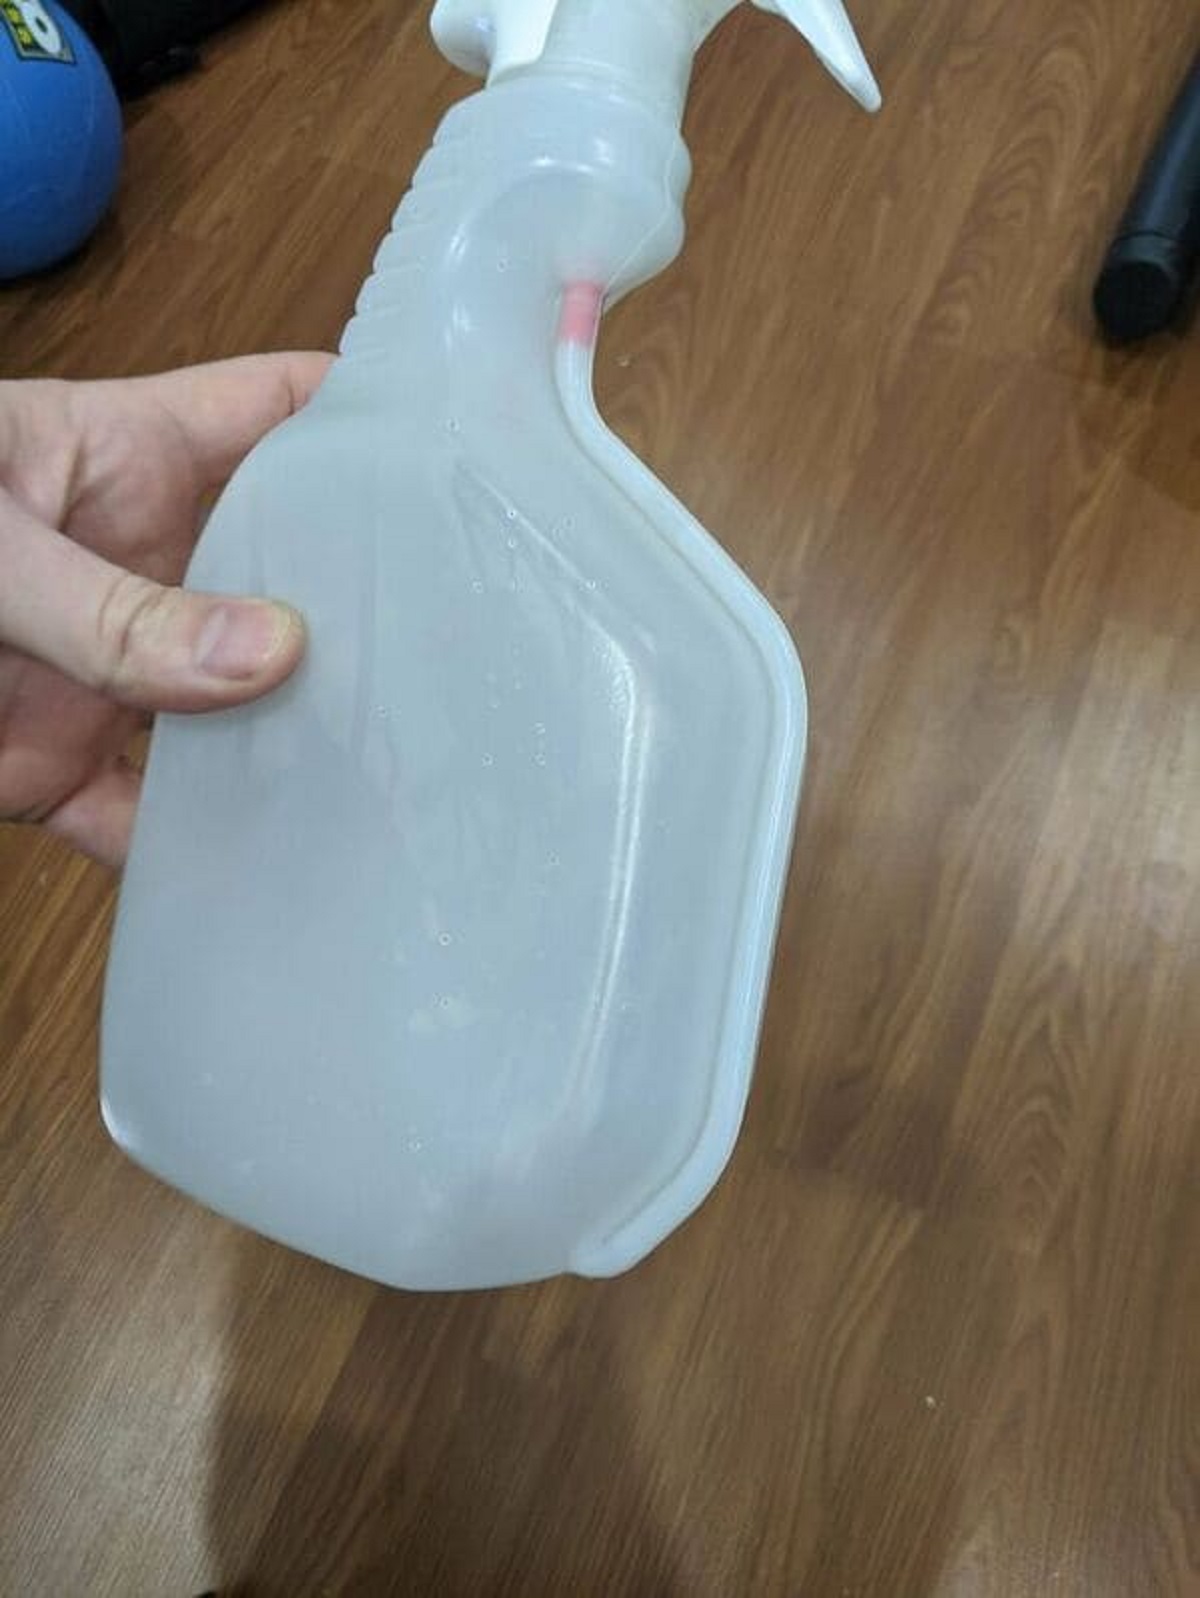 “This Bottle That Is Designed To Use All The Liquid On It”